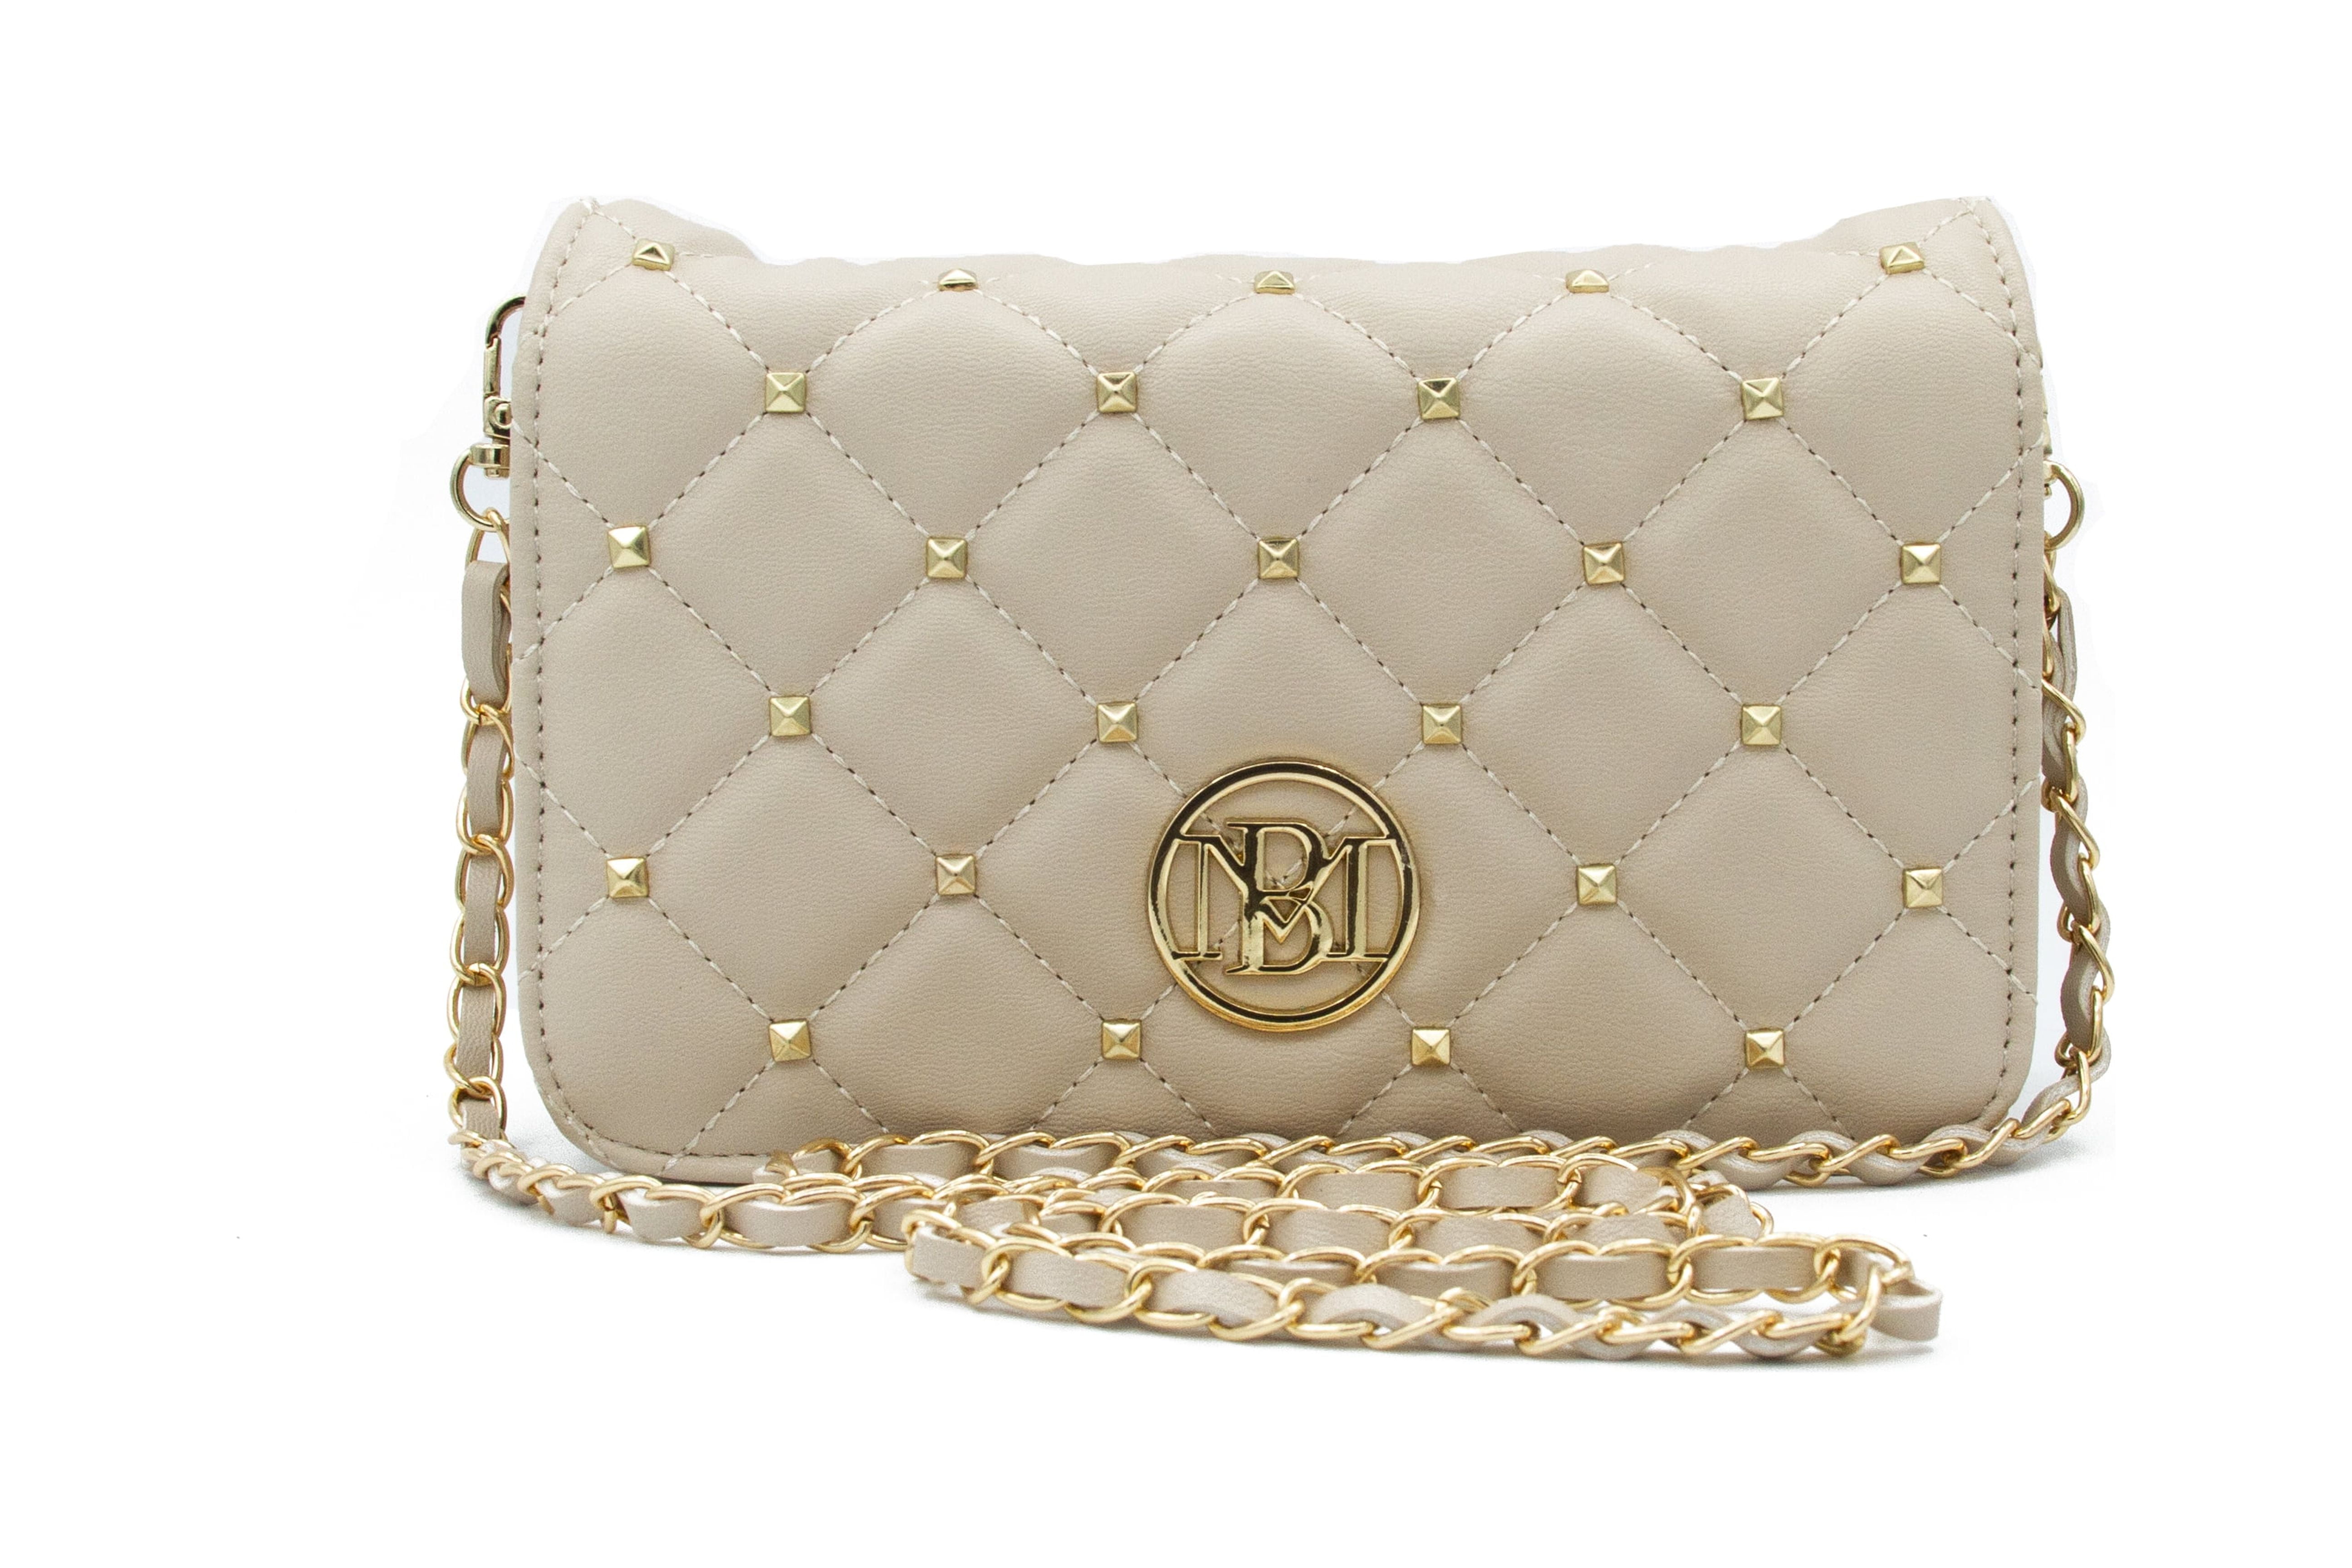 Best 25+ Deals for White Quilted Chanel Bag